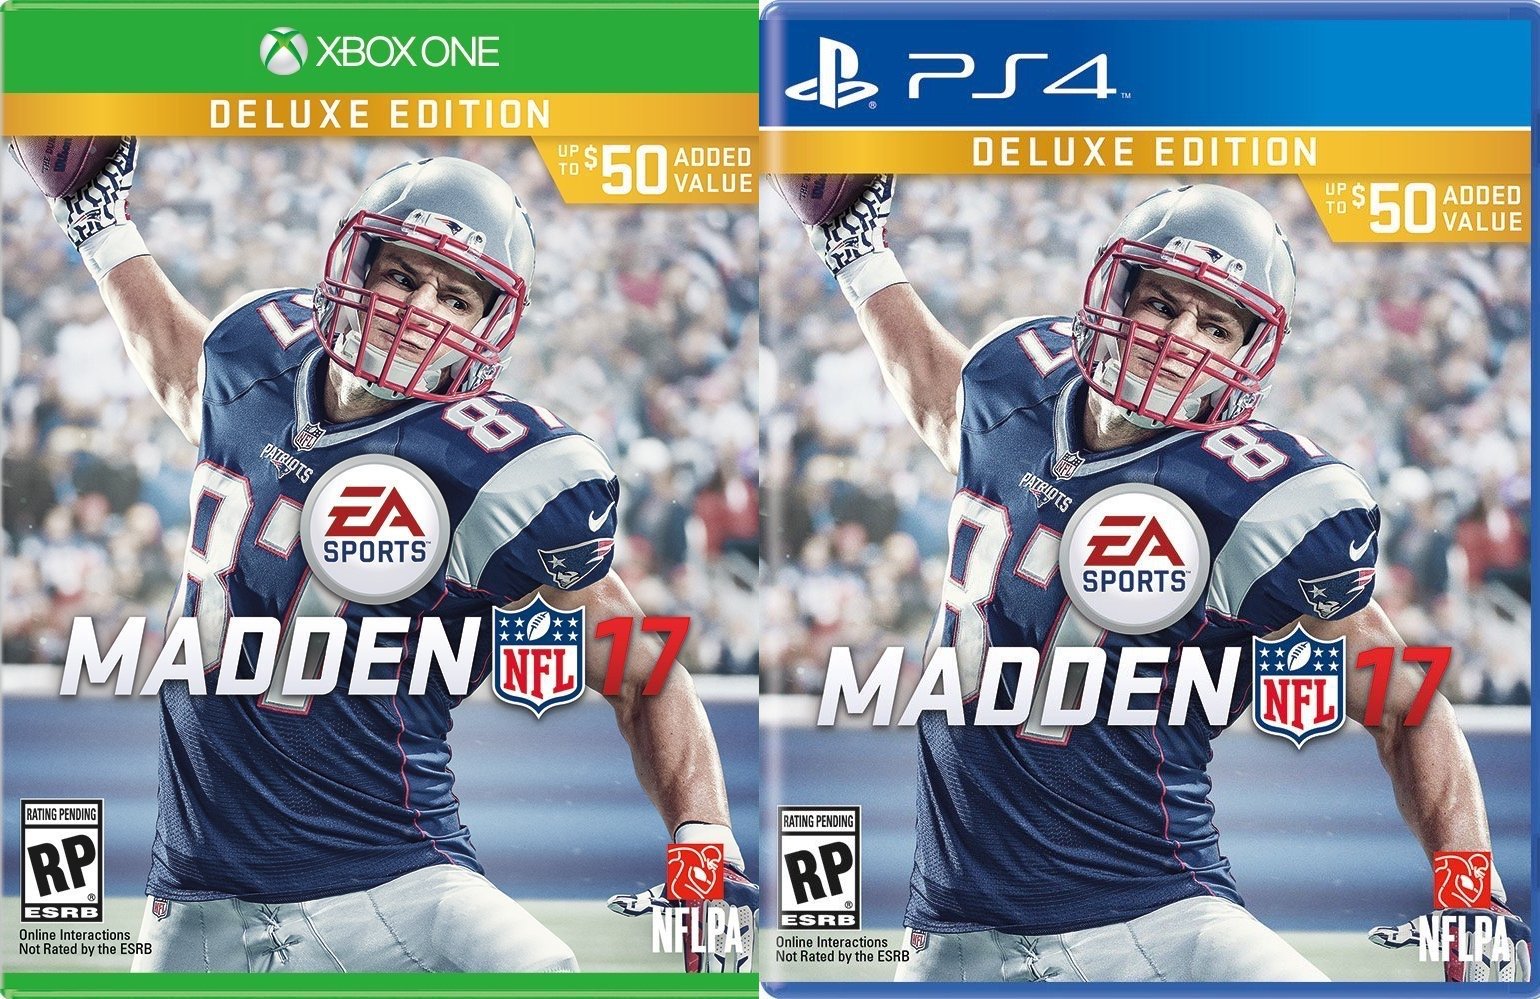 Find out if it is worth buying the Madden 17 Deluxe edition for $20 more.